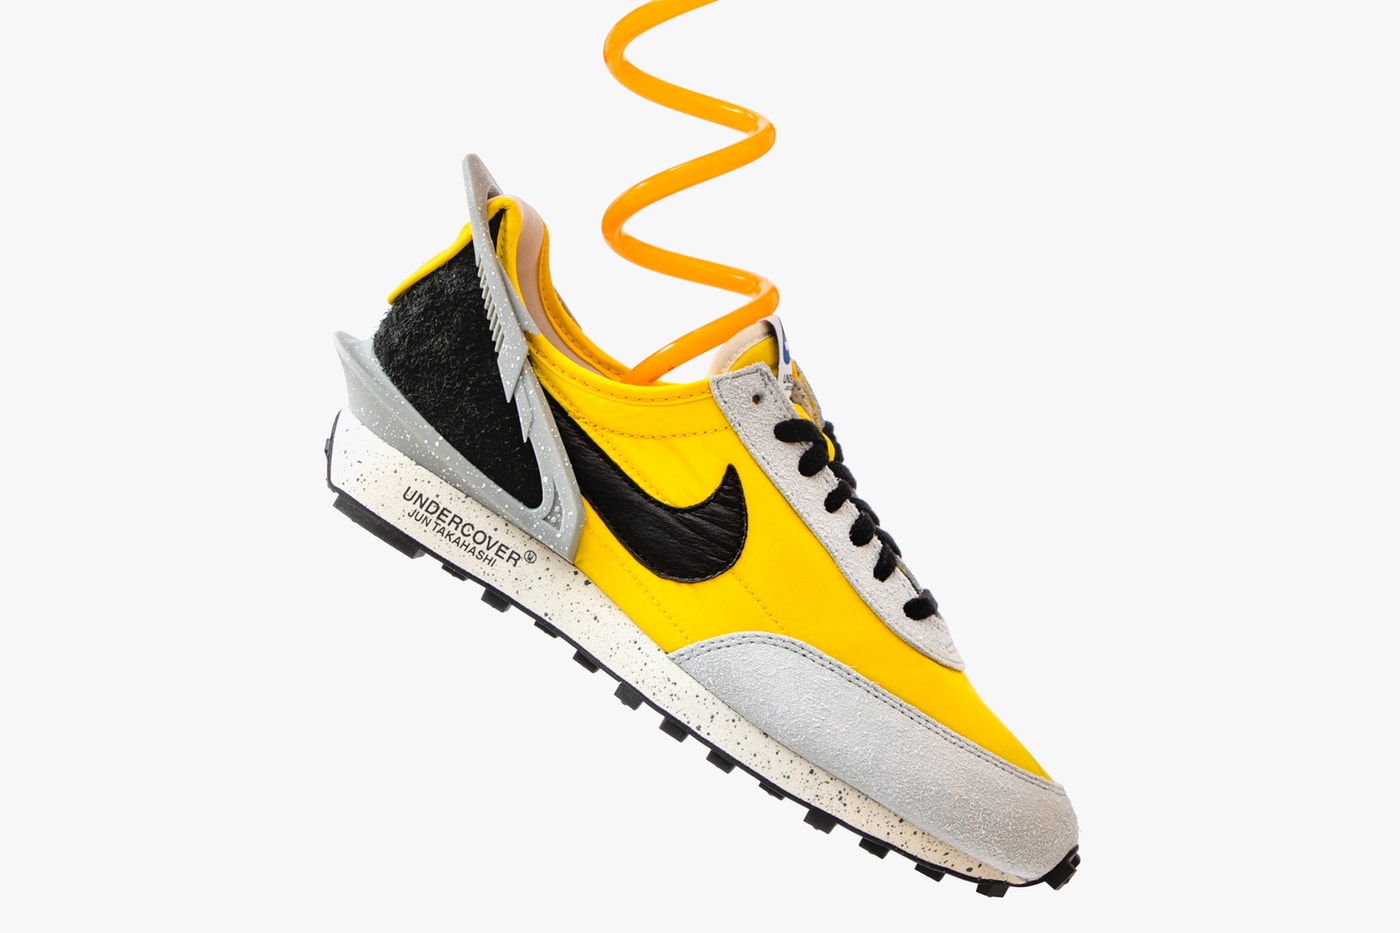 https%3A%2F%2Fhypebeast.com%2Fimage%2F2019%2F07%2Fundercover-nike-daybreak-sneaker-collaboration-closer-look-yellow-bright-citron-black-2.jpg